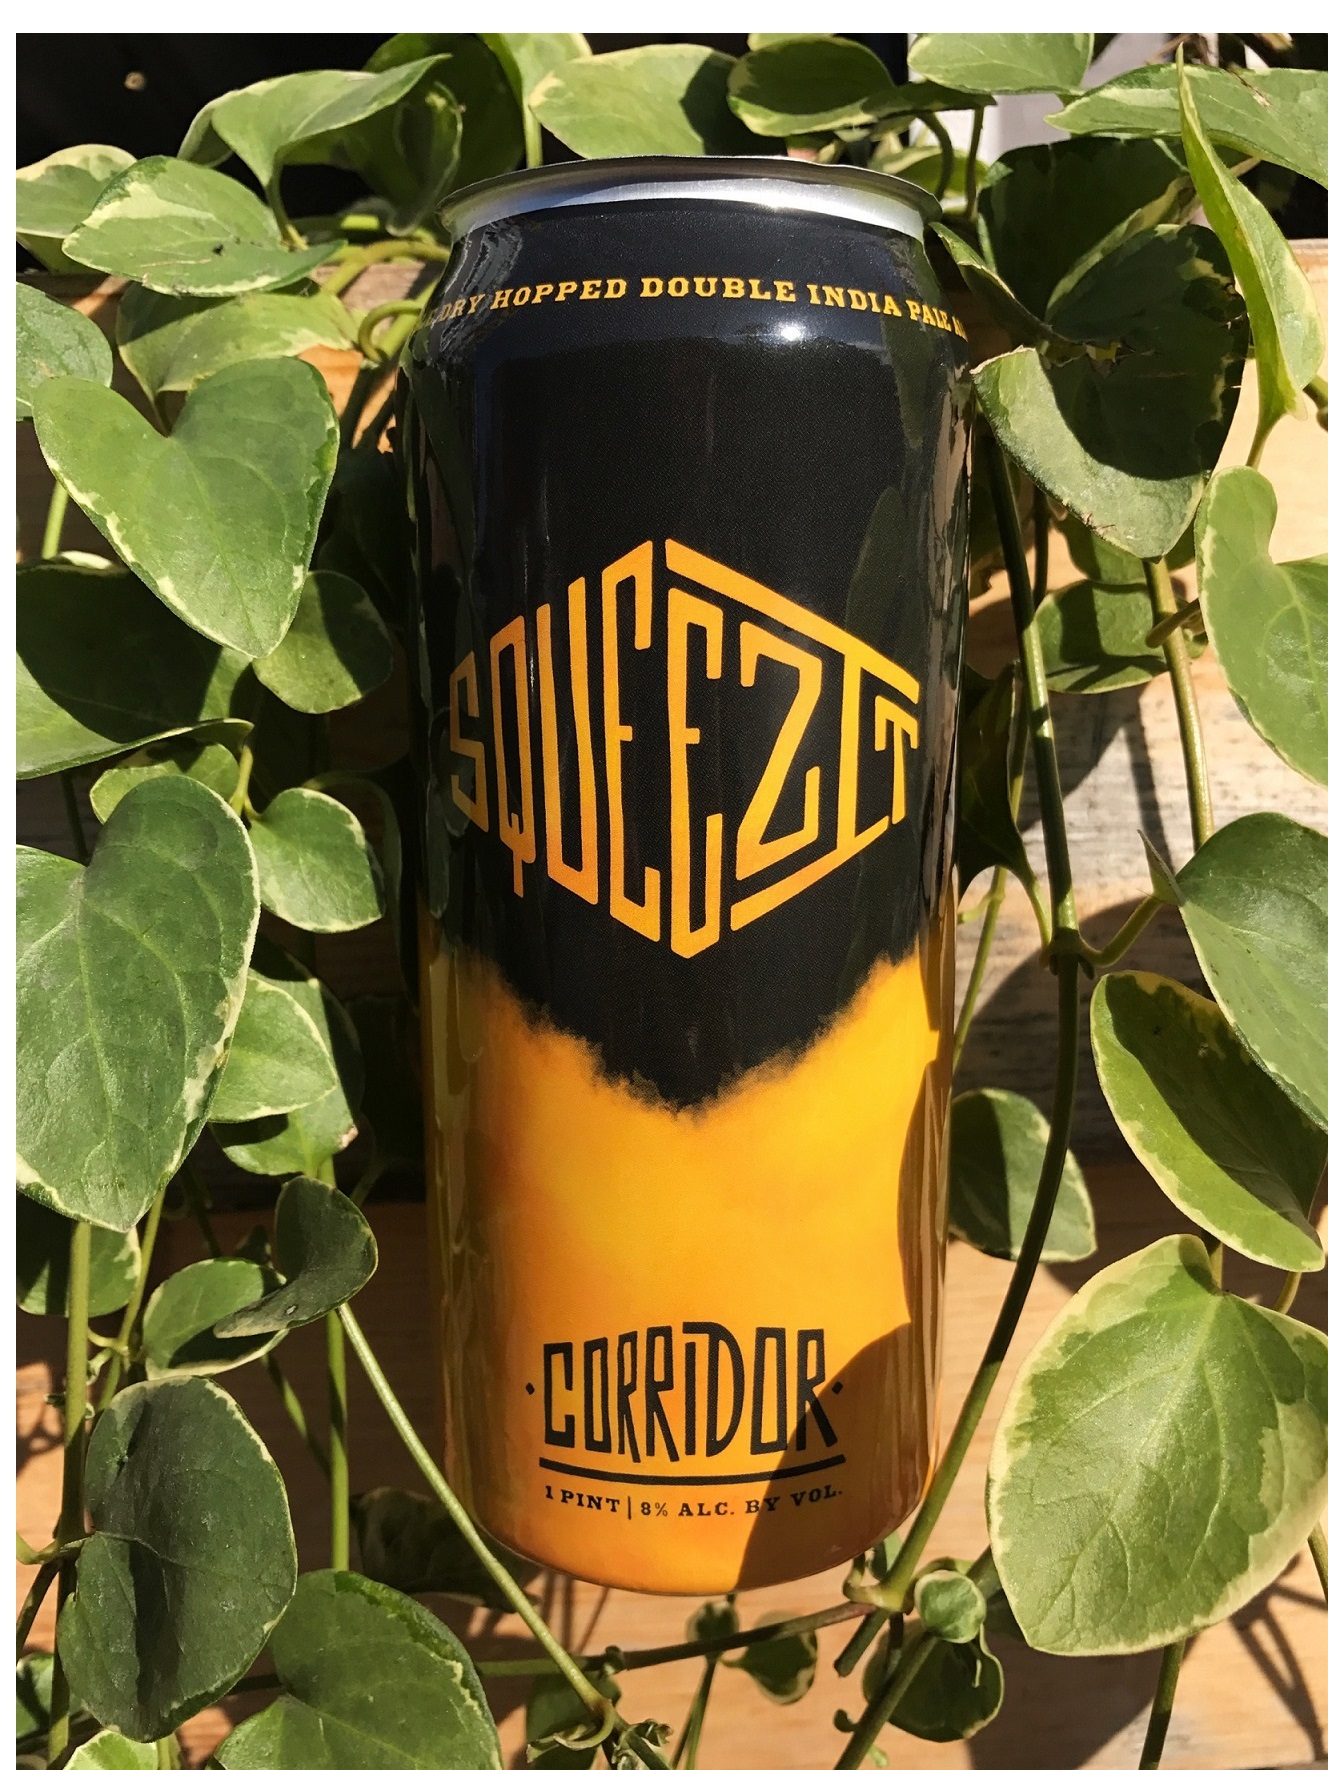 Fast Facts on Corridor Brewery & Provisions’ First Canned Beer: SqueezIt